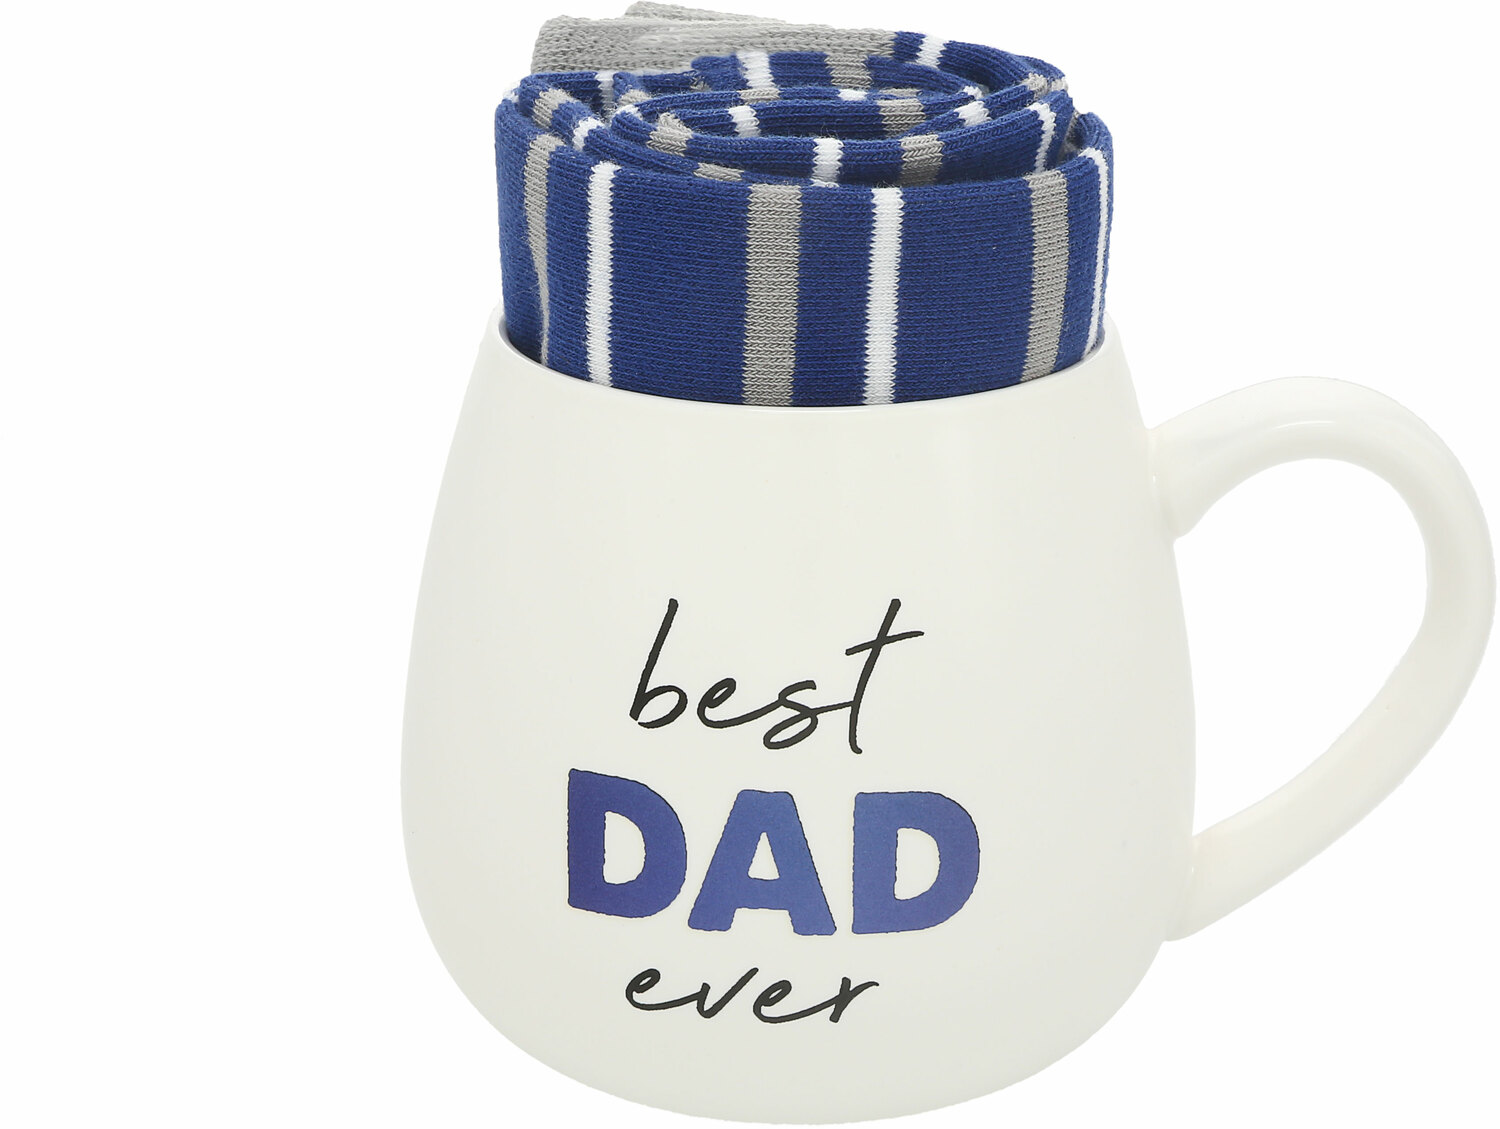 Dad Tumbler- Gifts for Dad from Daughter Son Kids - Dad Wine Glass for Mens  tumbler -Fathers Day Birthday Gifts for \u200bDad -20 oz Dad Travel Tumbler  Cup Mugs 